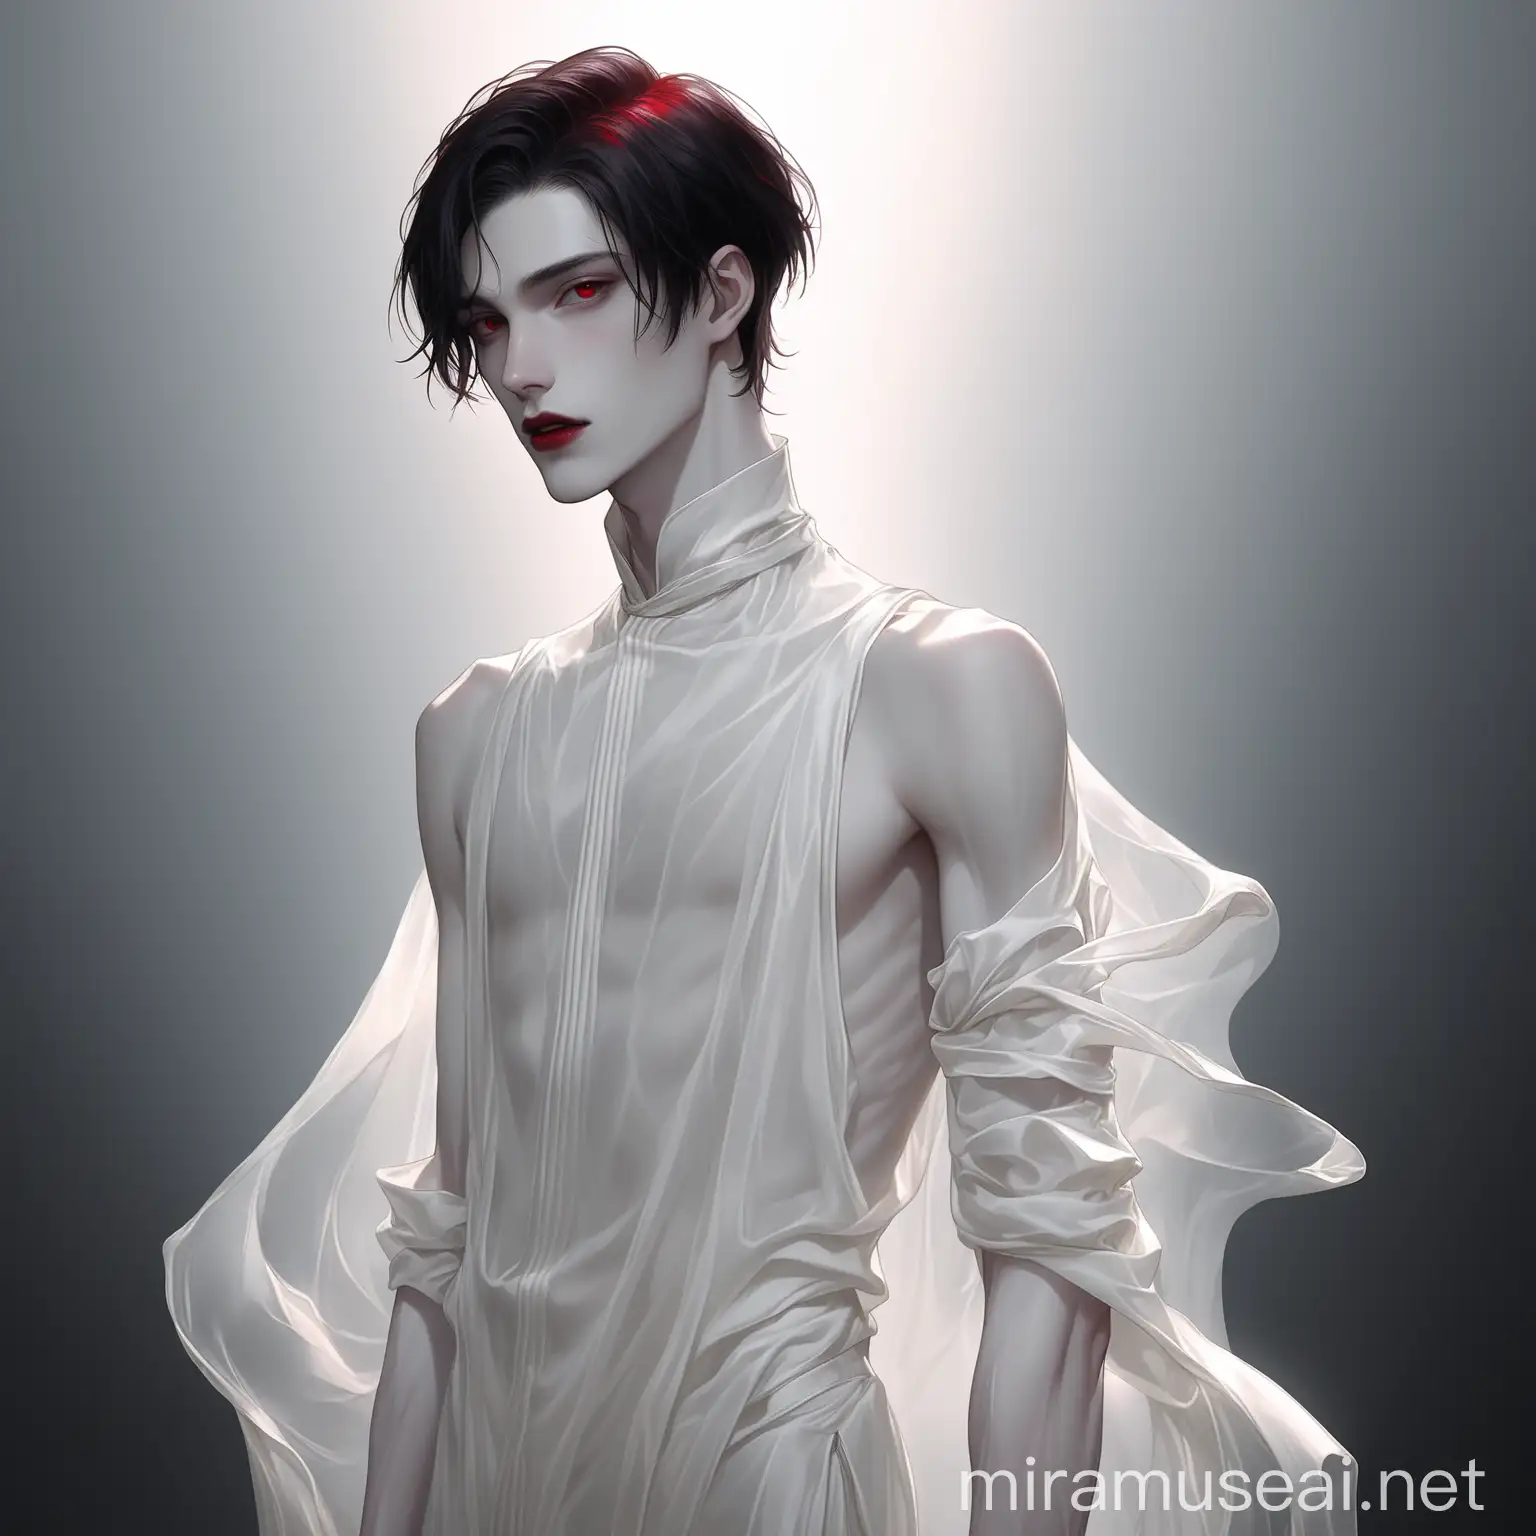 Young God in White Silk Attire with Ruby Eyes and Dark Hair